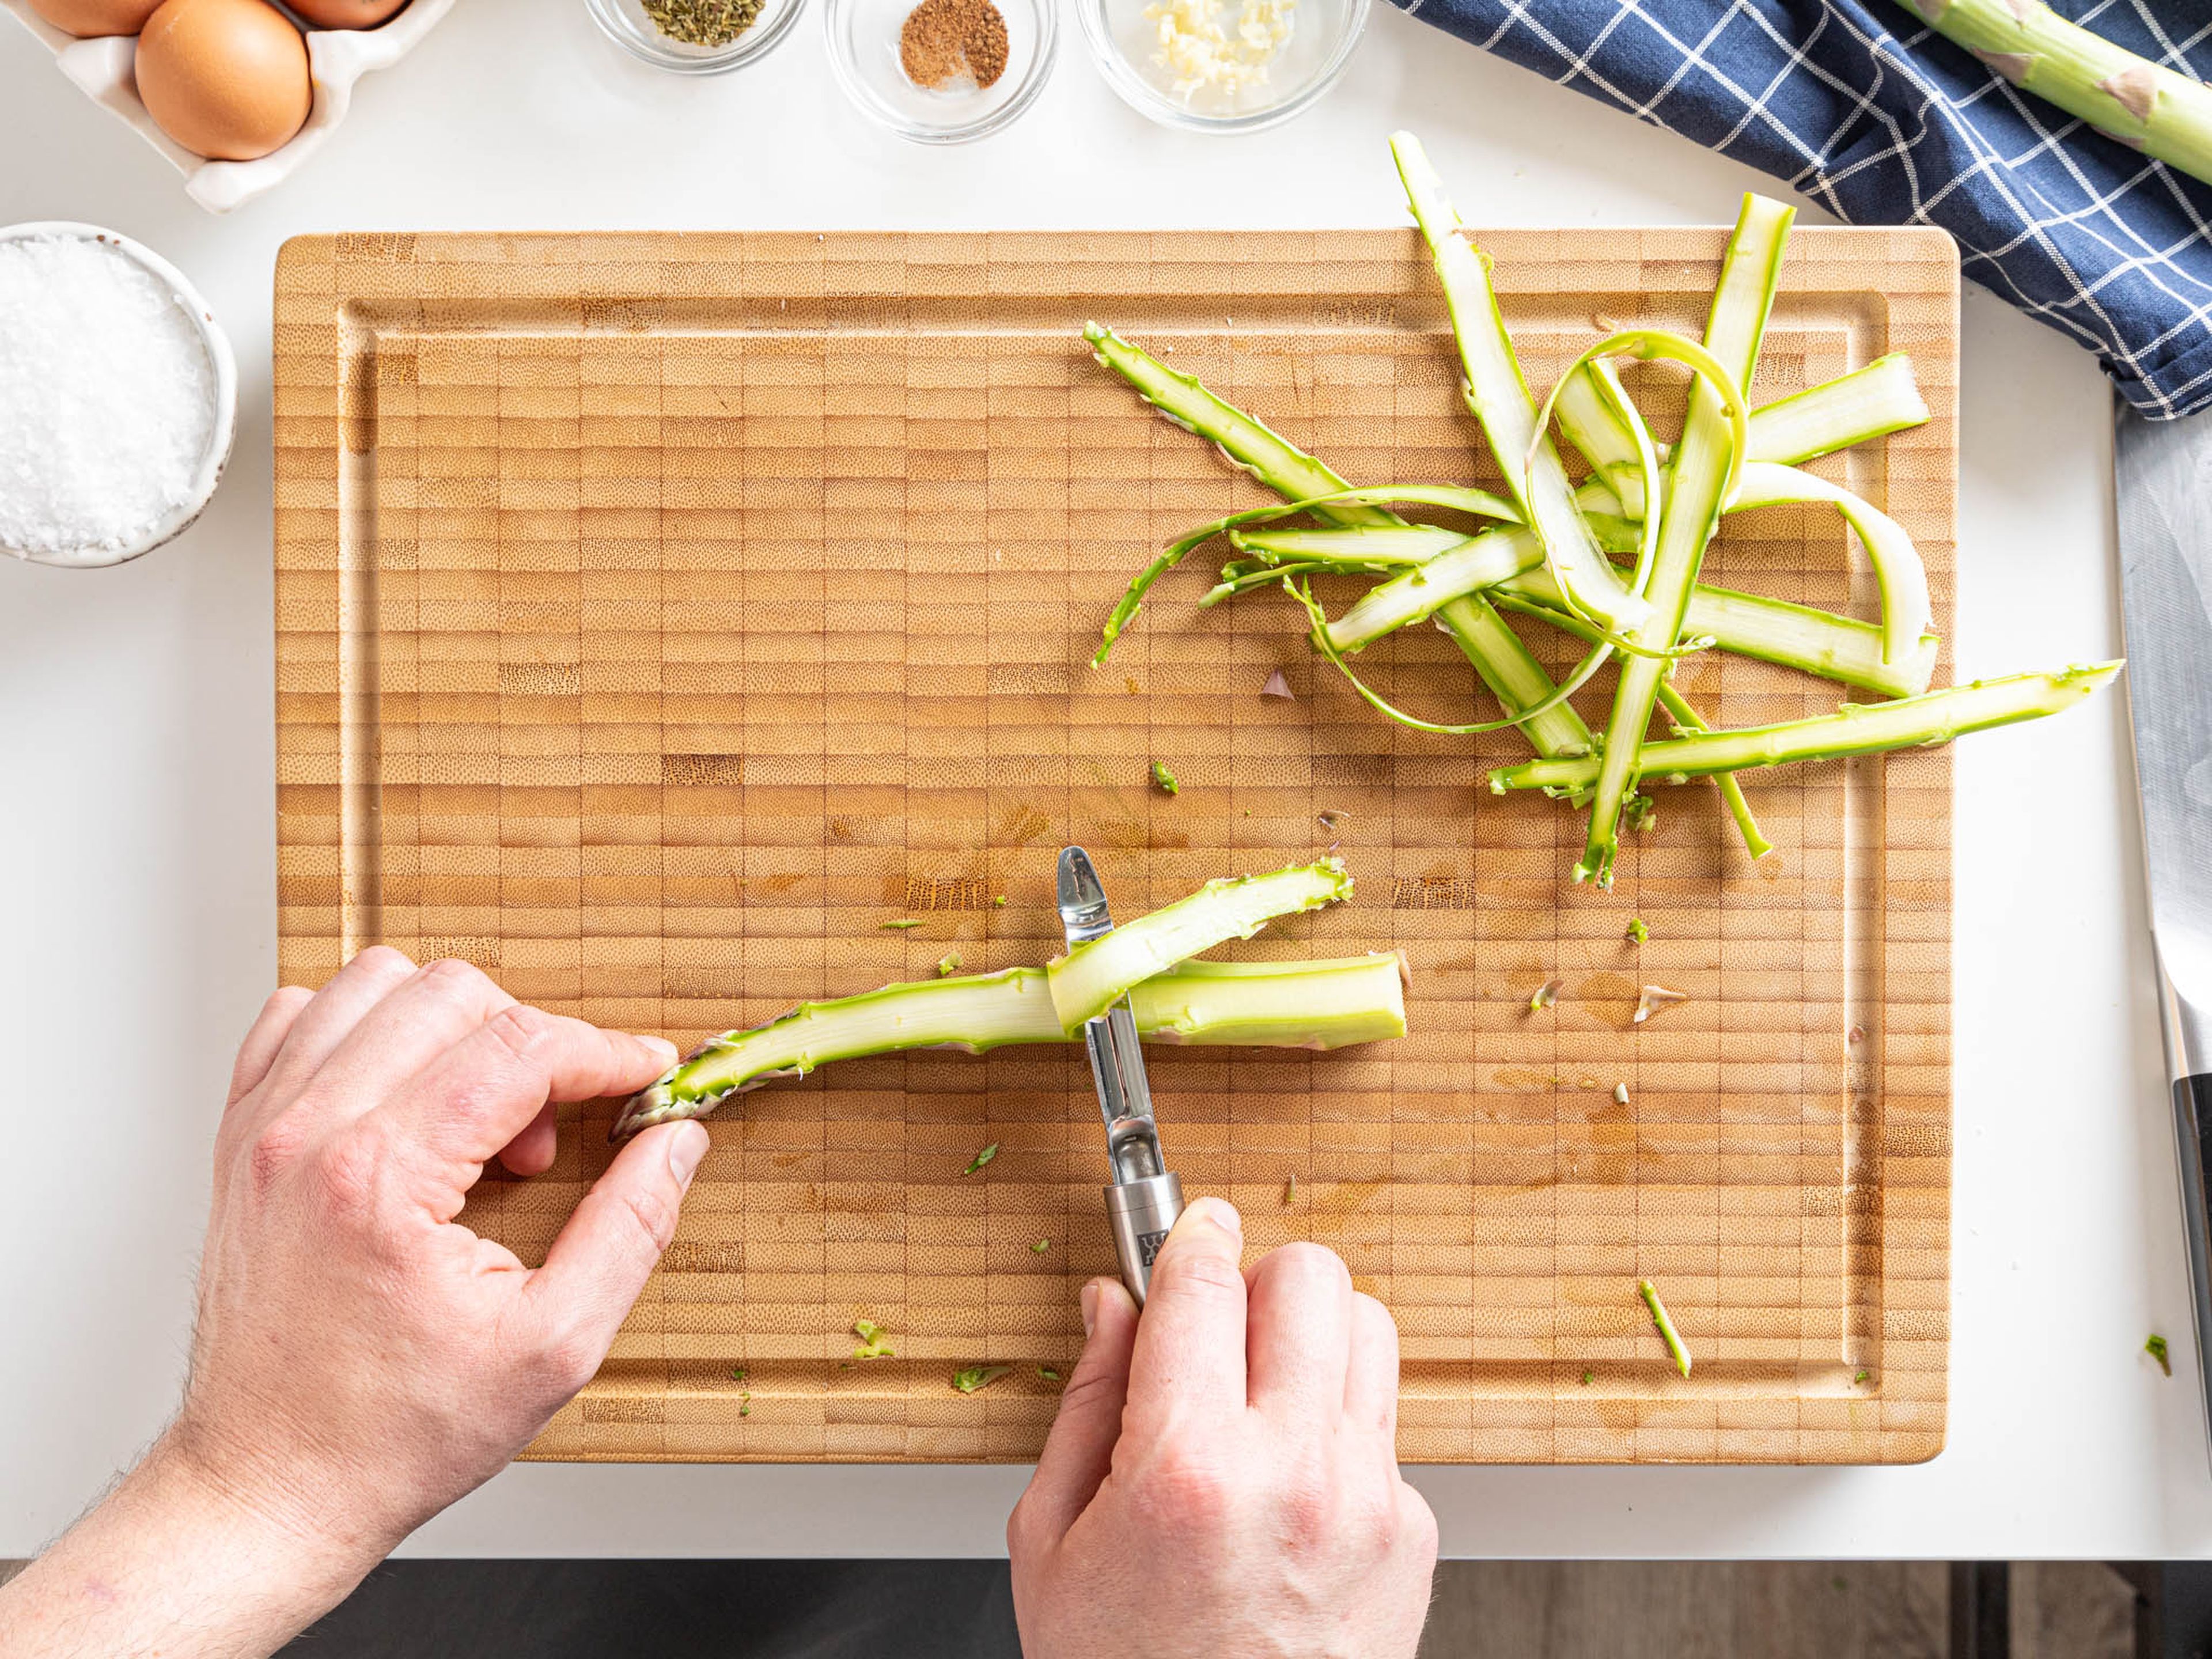 Coarsely grate the Parmesan, chop the garlic, and halve the cherry tomatoes. Finely chop the parsley. Cut off the woody ends of the green asparagus, then use a vegetable peeler to carefully shave long lengths of asparagus.